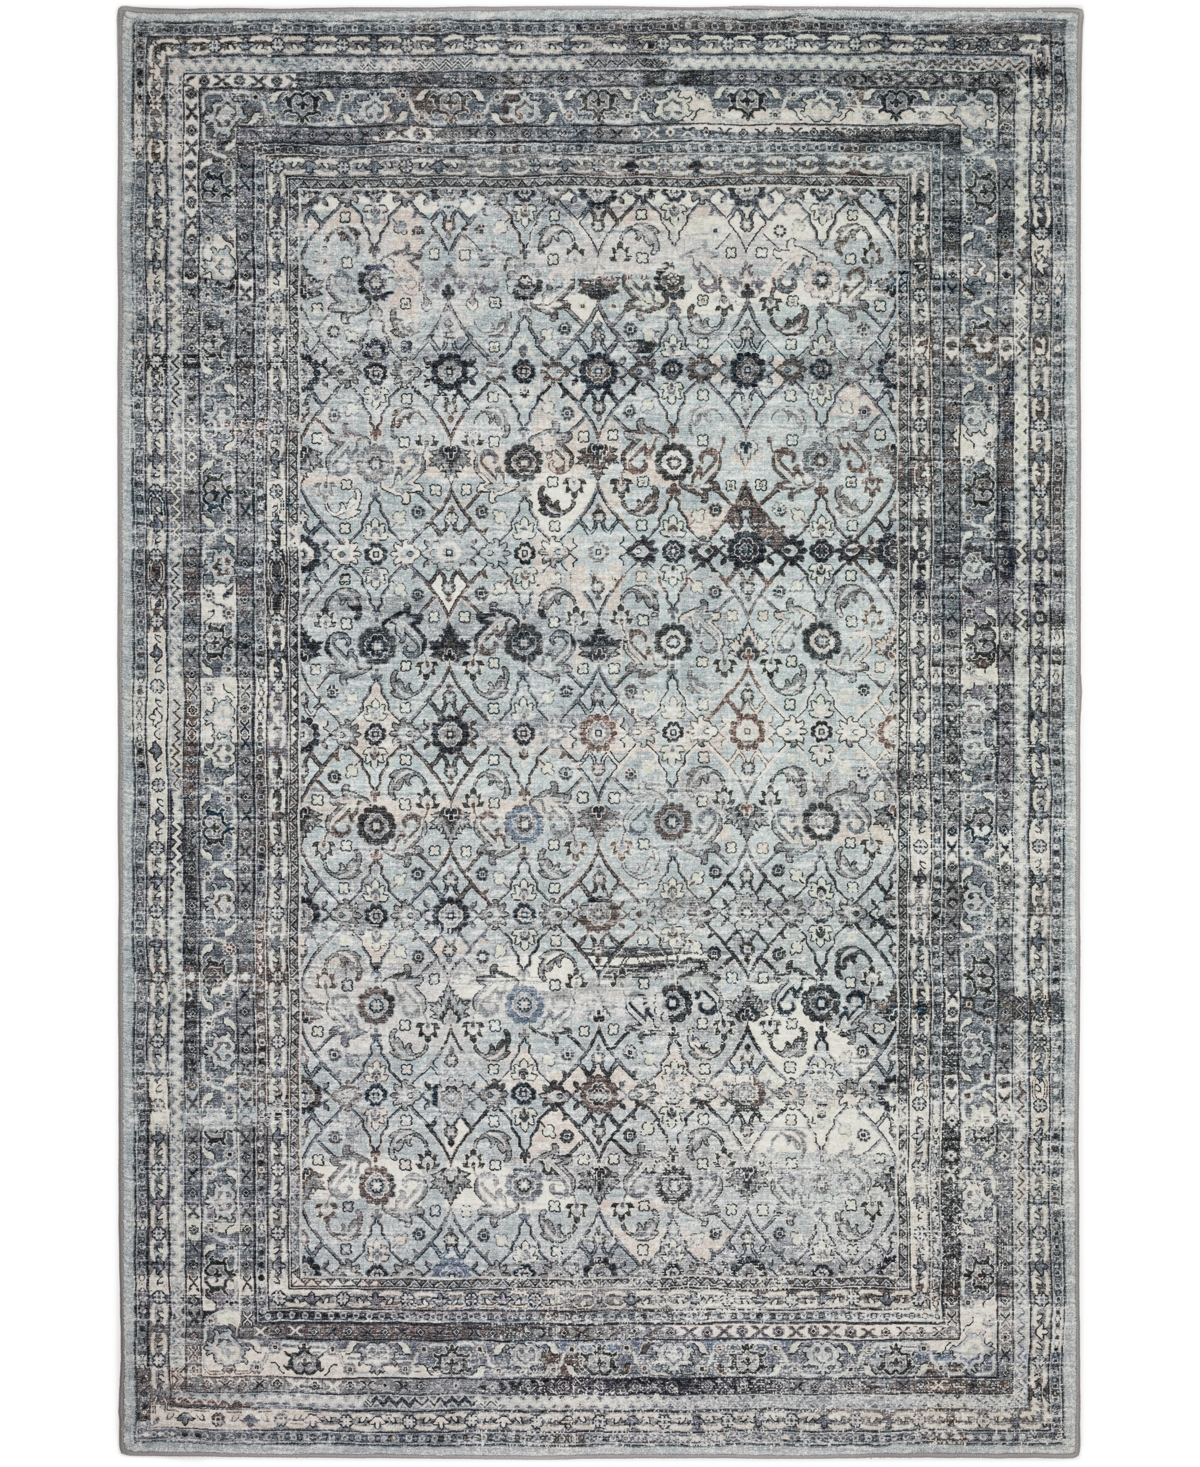 D Style Basilic Bas7 5' X 7'6" Area Rug In Charcoal